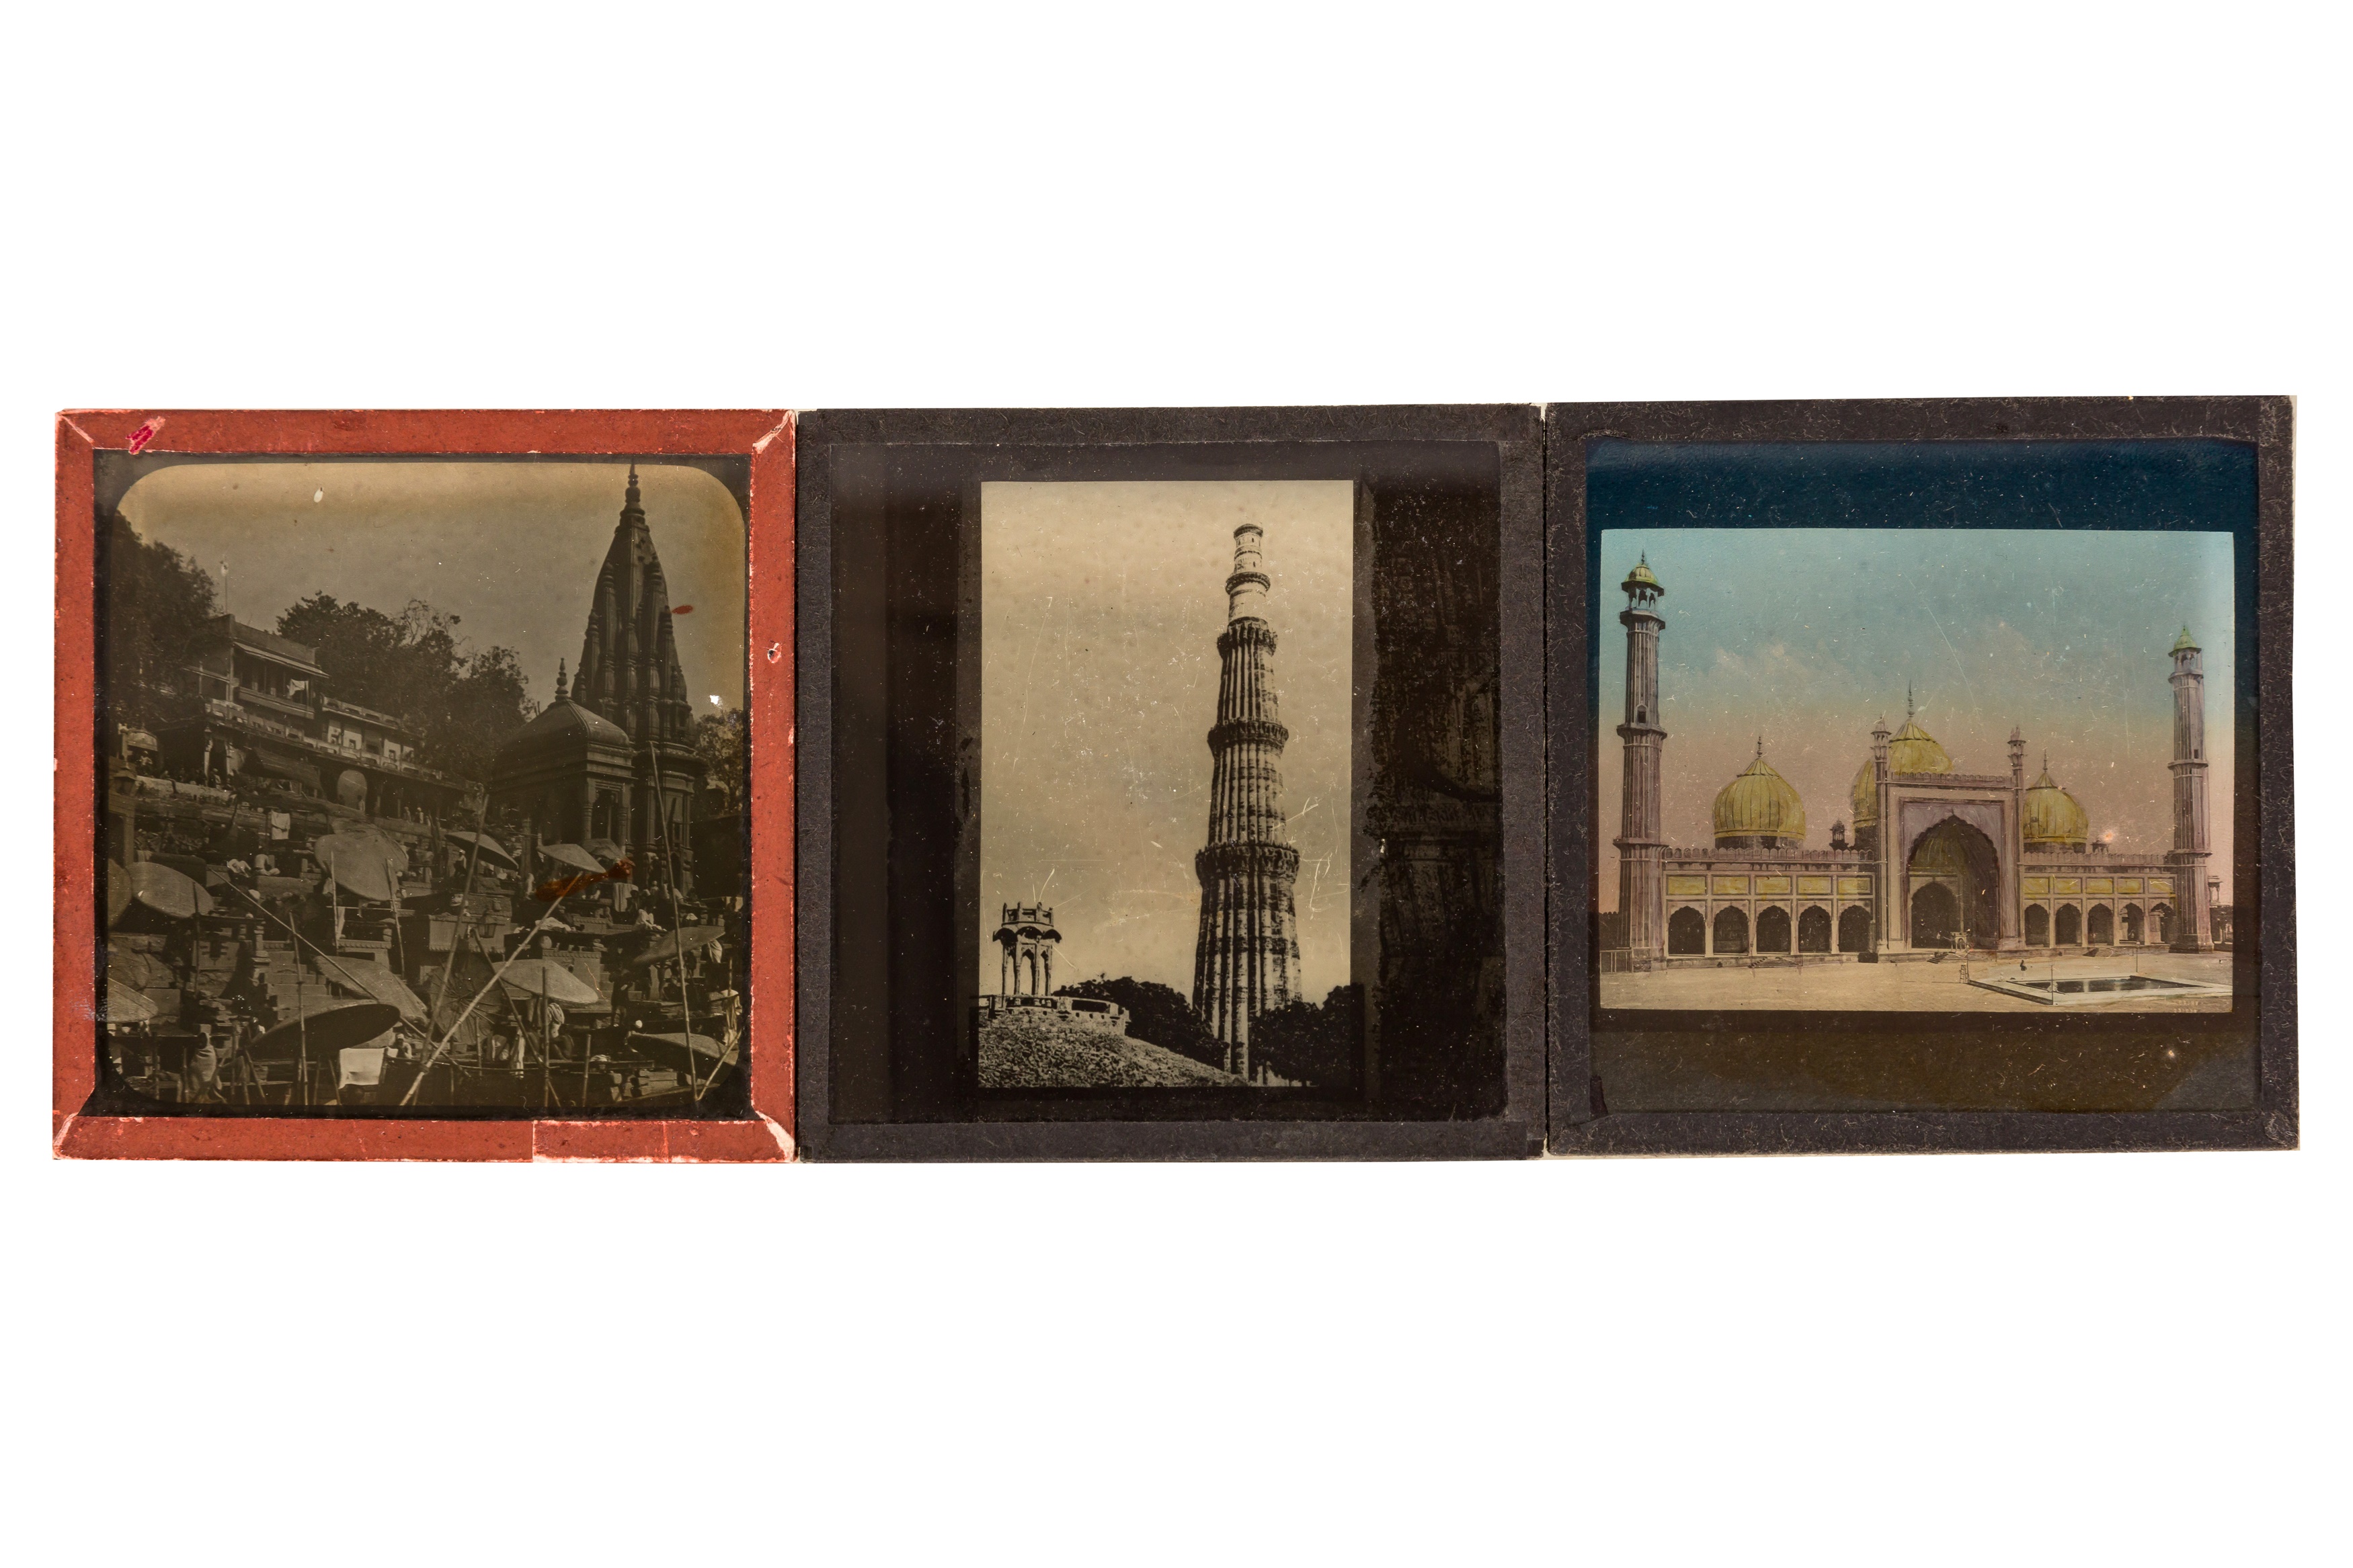 LARGE COLLECTION OF MAGIC LANTERN SLIDES, INDIA, early 20th century - Image 2 of 2